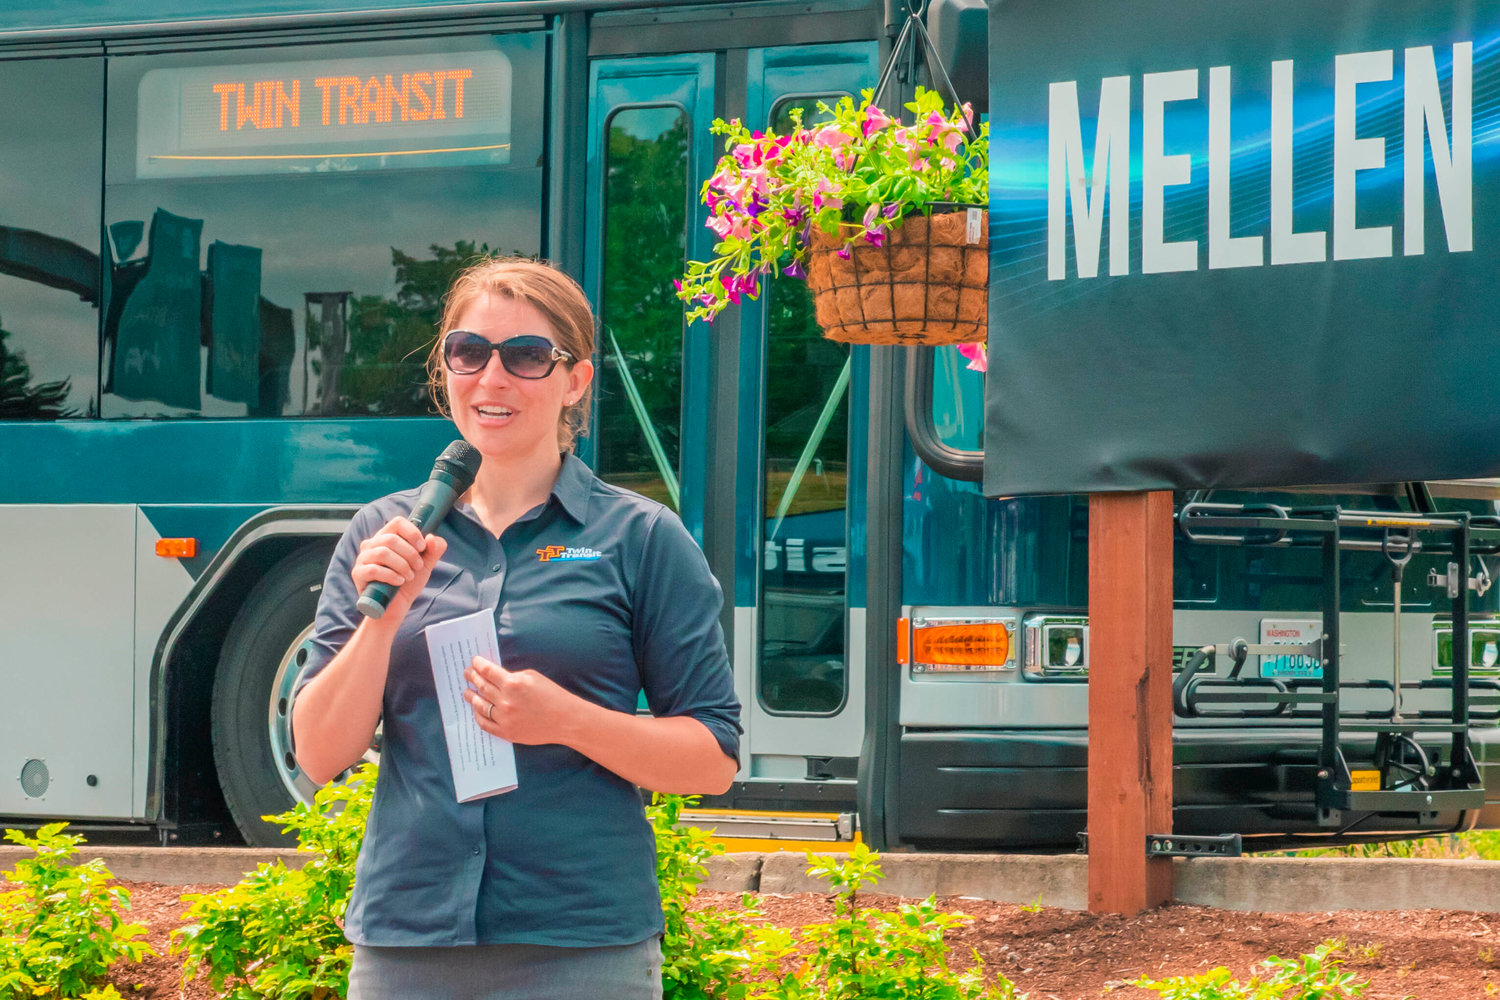 Andrea Culletto, director of Twin Transit’s community relations, smiles as she talks during the unveiling of the Mellen Street E-transit Station in Centralia on Thursday.